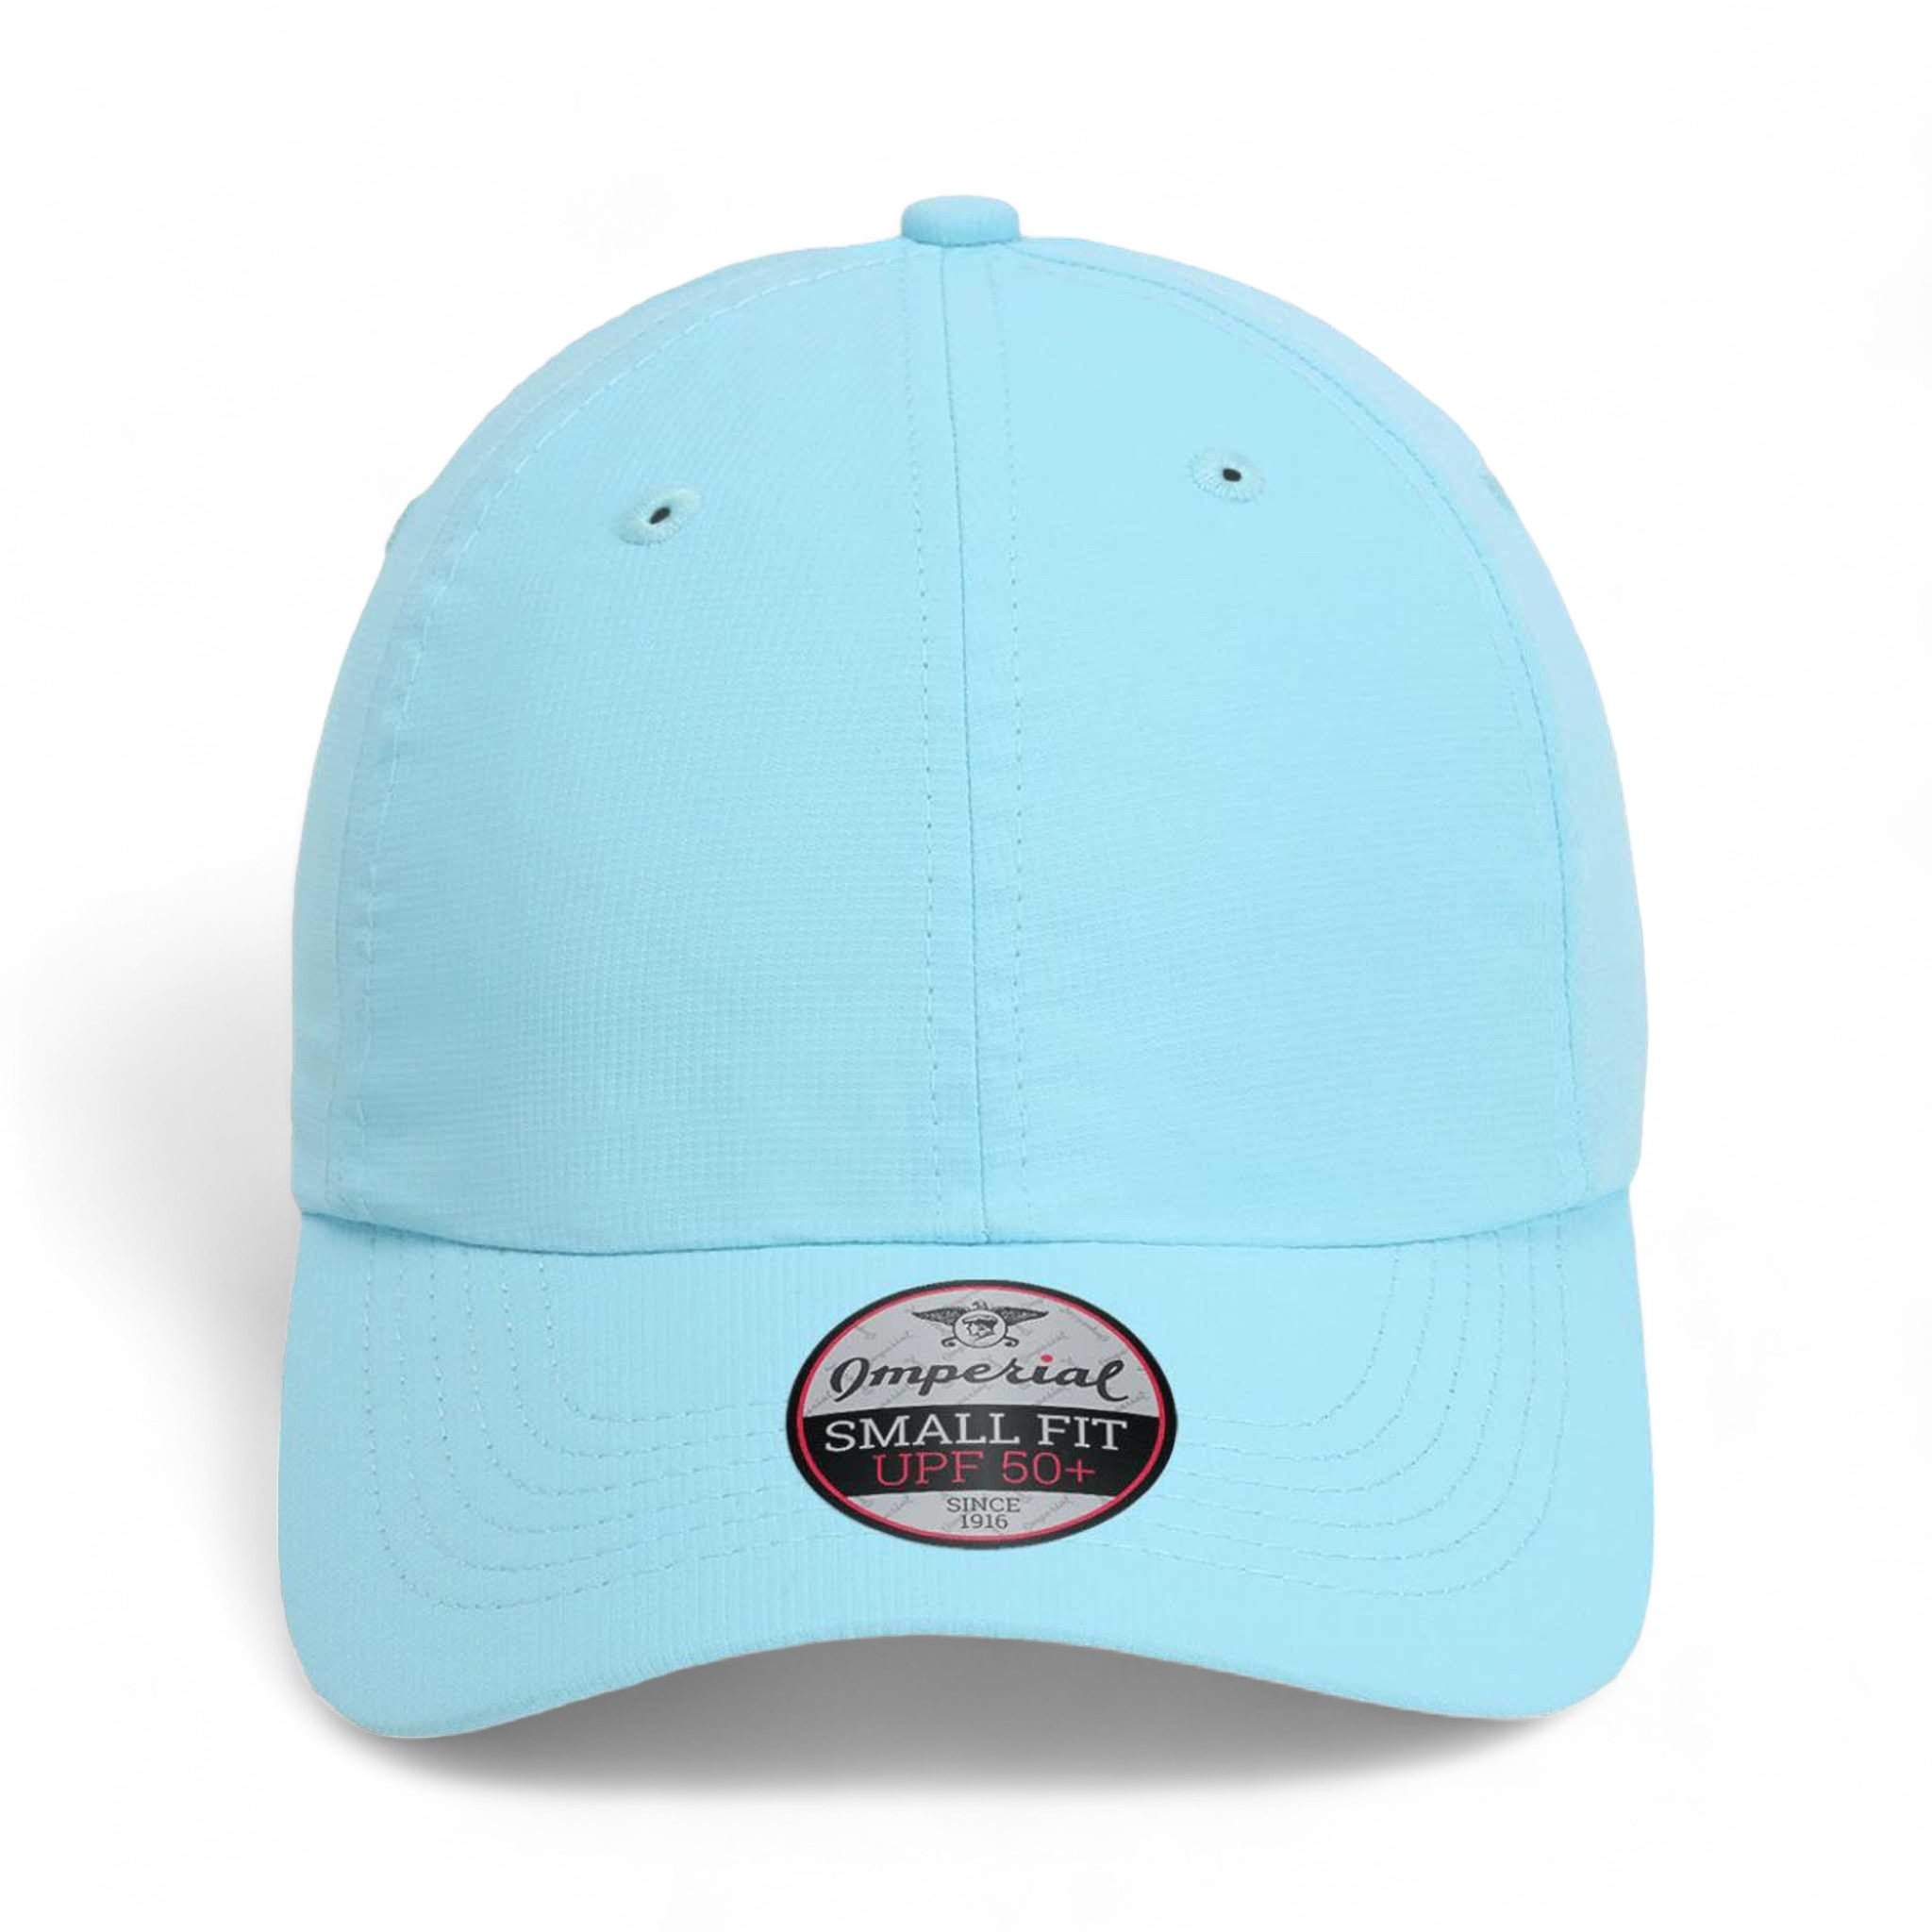 Front view of Imperial L338 custom hat in light blue